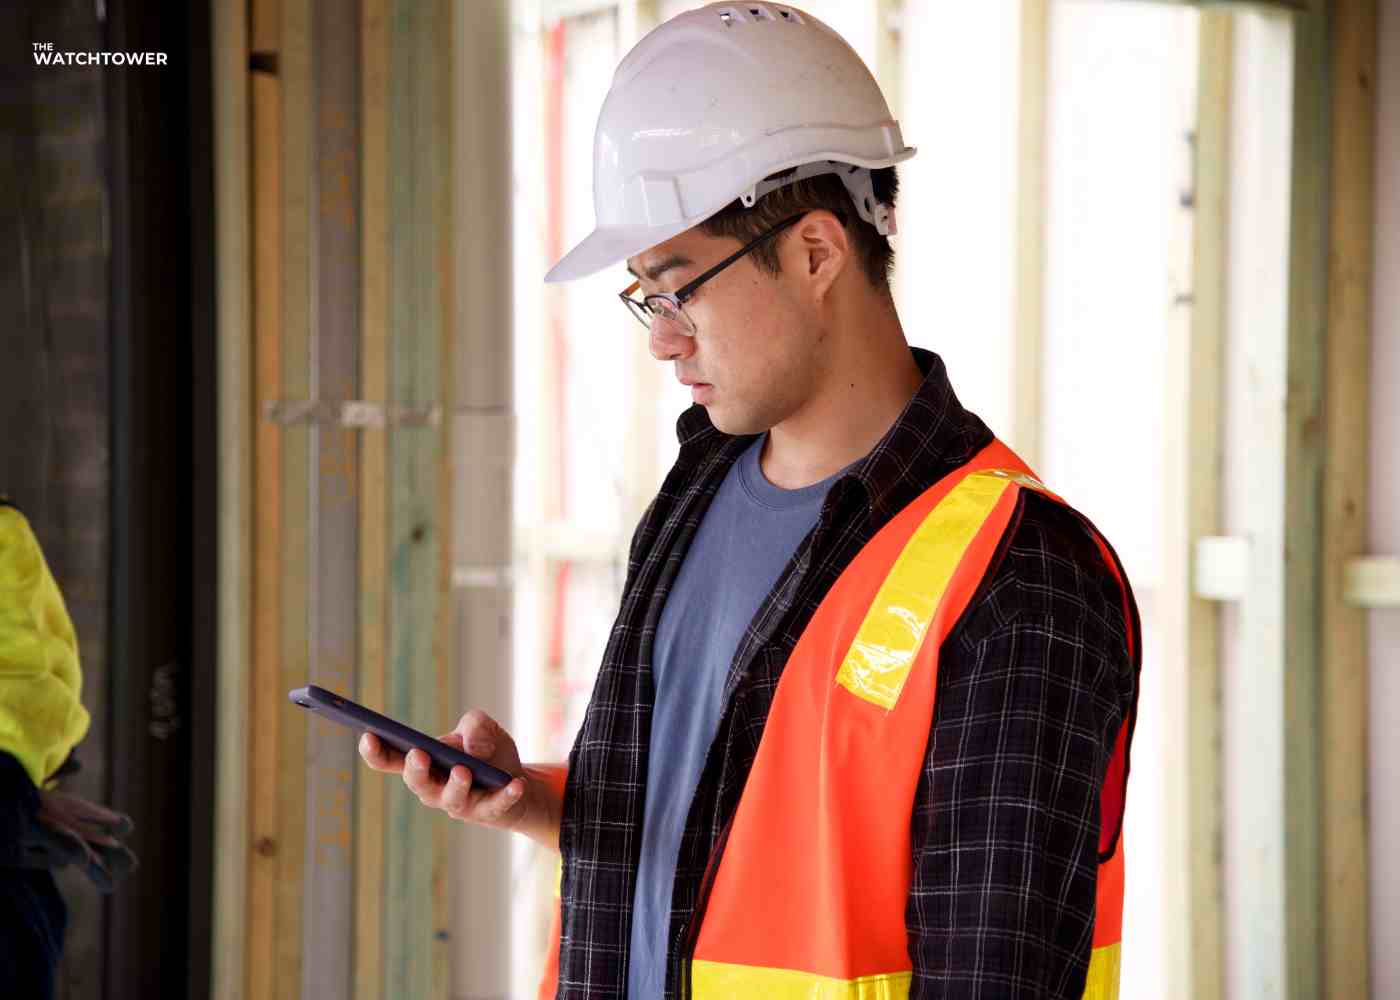 Tips For Successful Implementation of Mobile Time Clocks in Construction